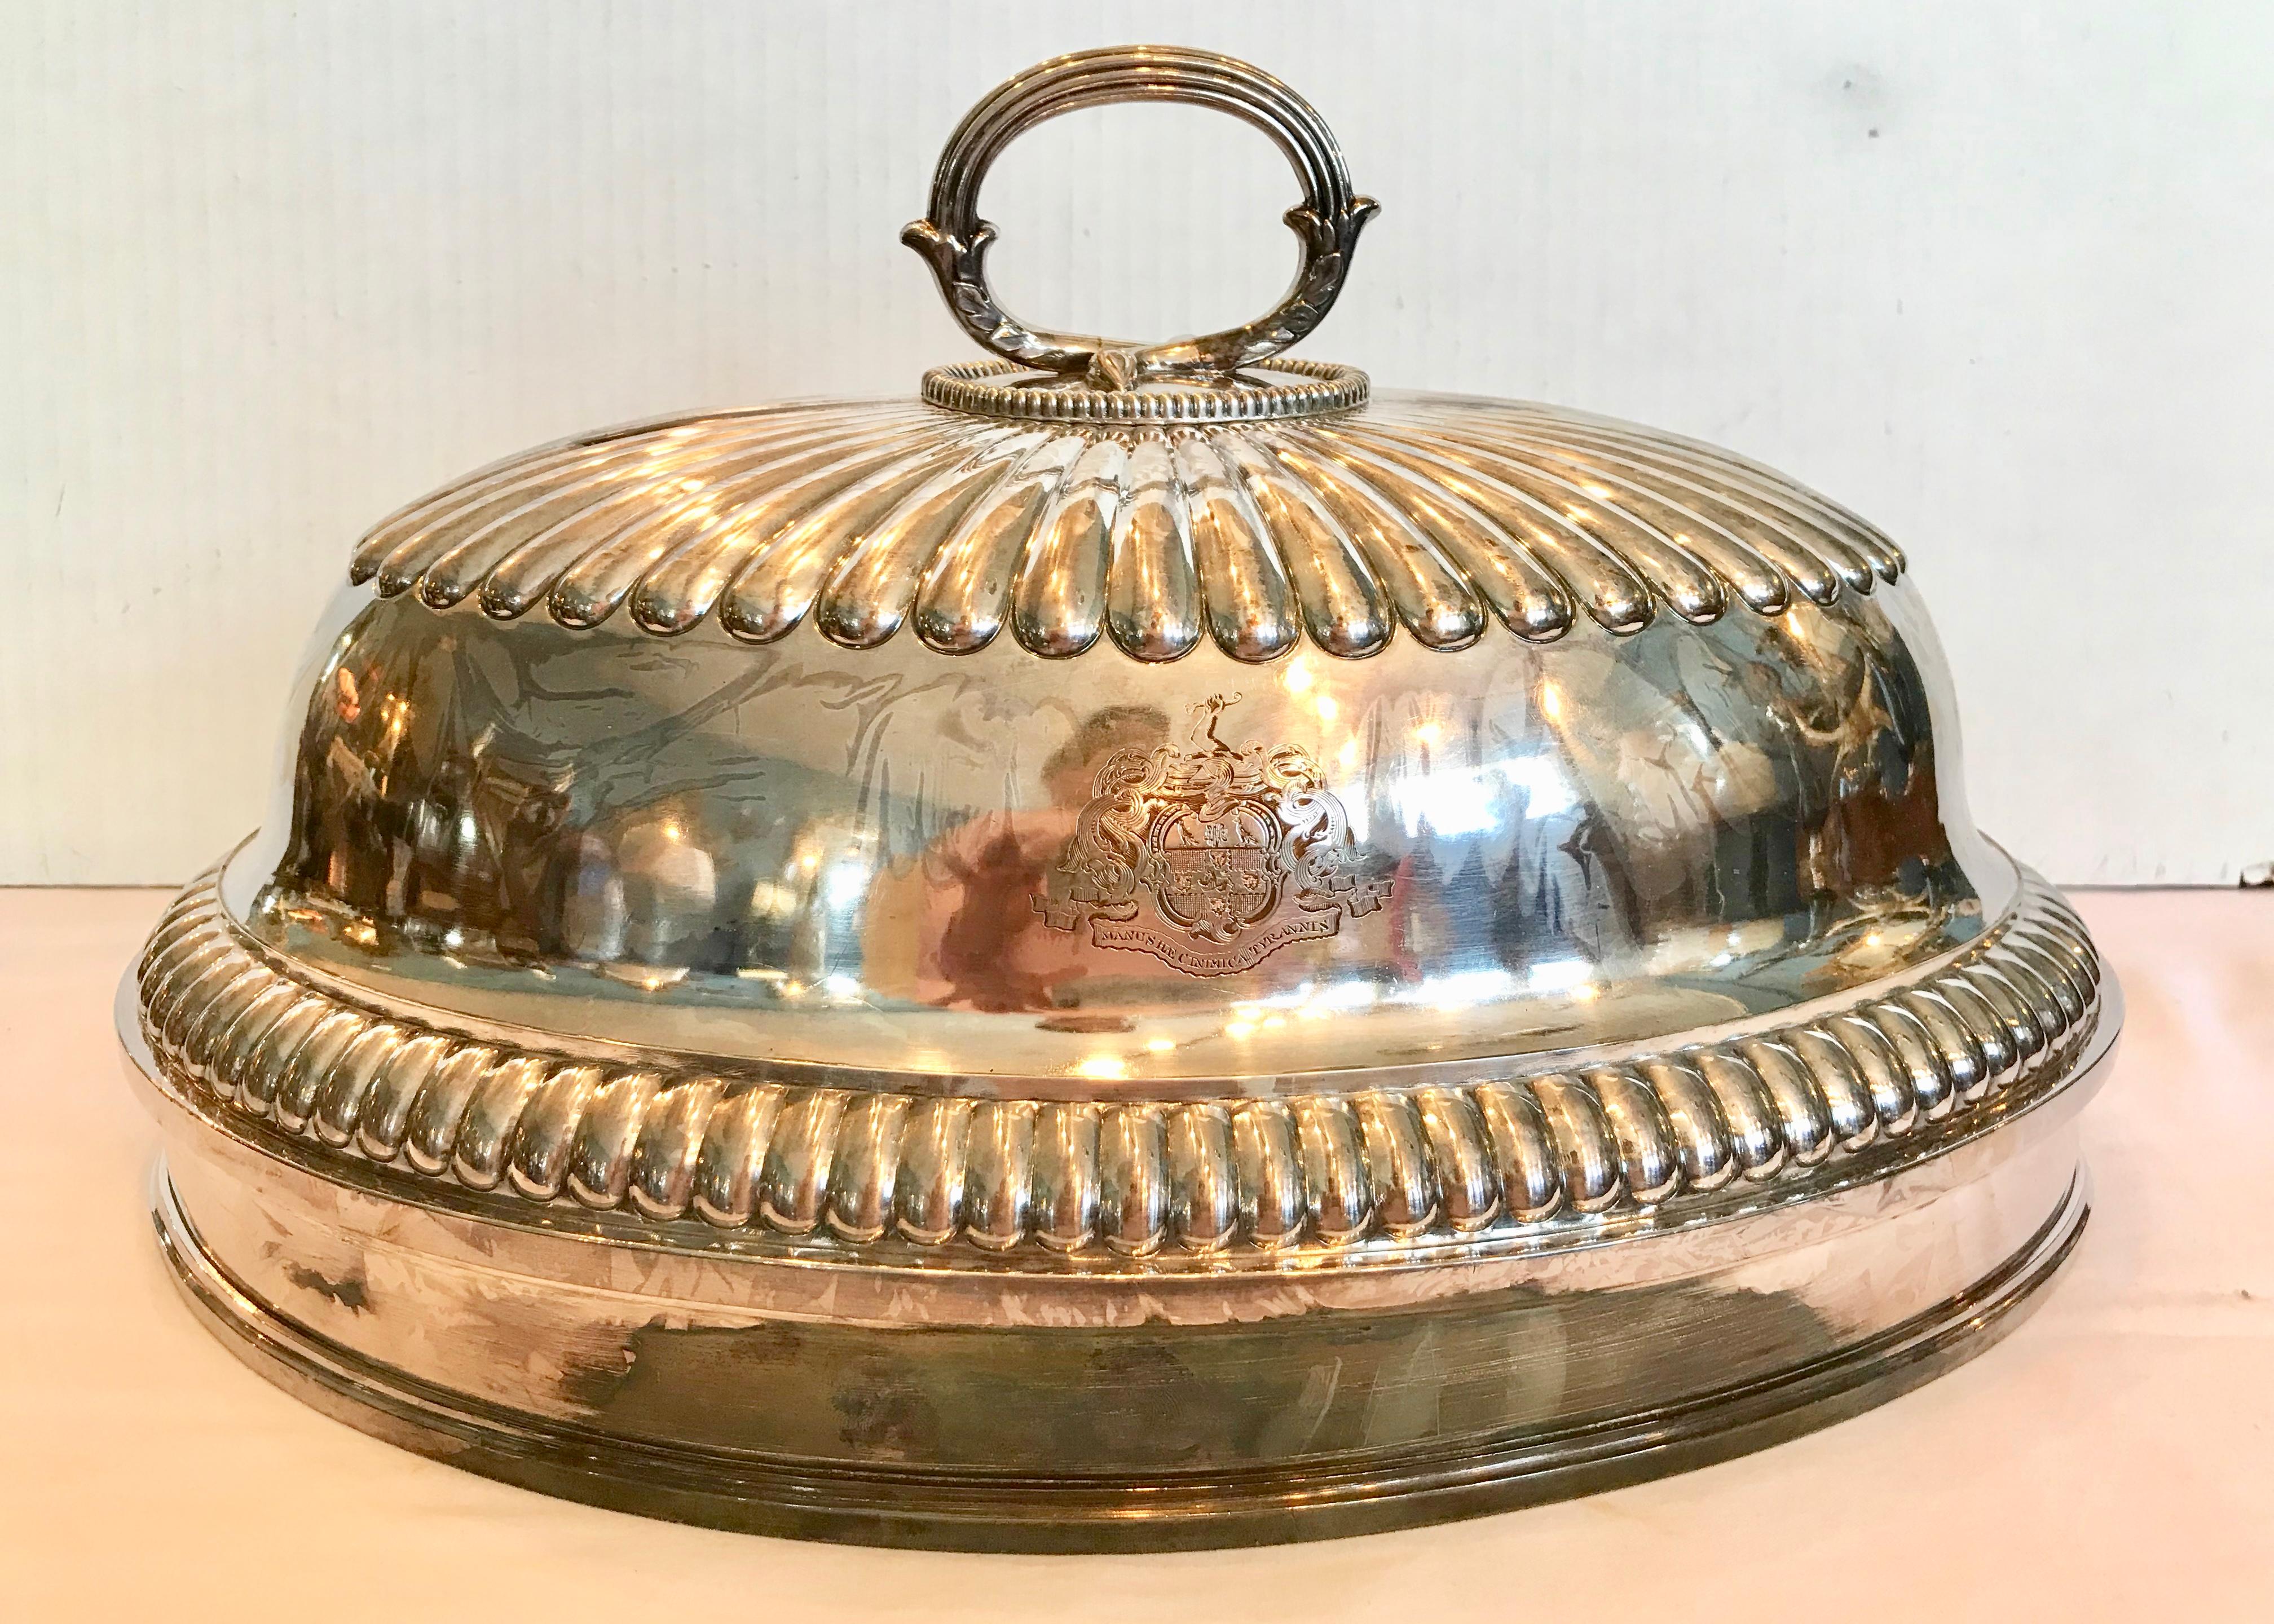 Fashioned with a reeded top and sides. The dome is appointed with a twig-like handle 
and is decorated with a coat of arms featuring a rampant lion in its center.